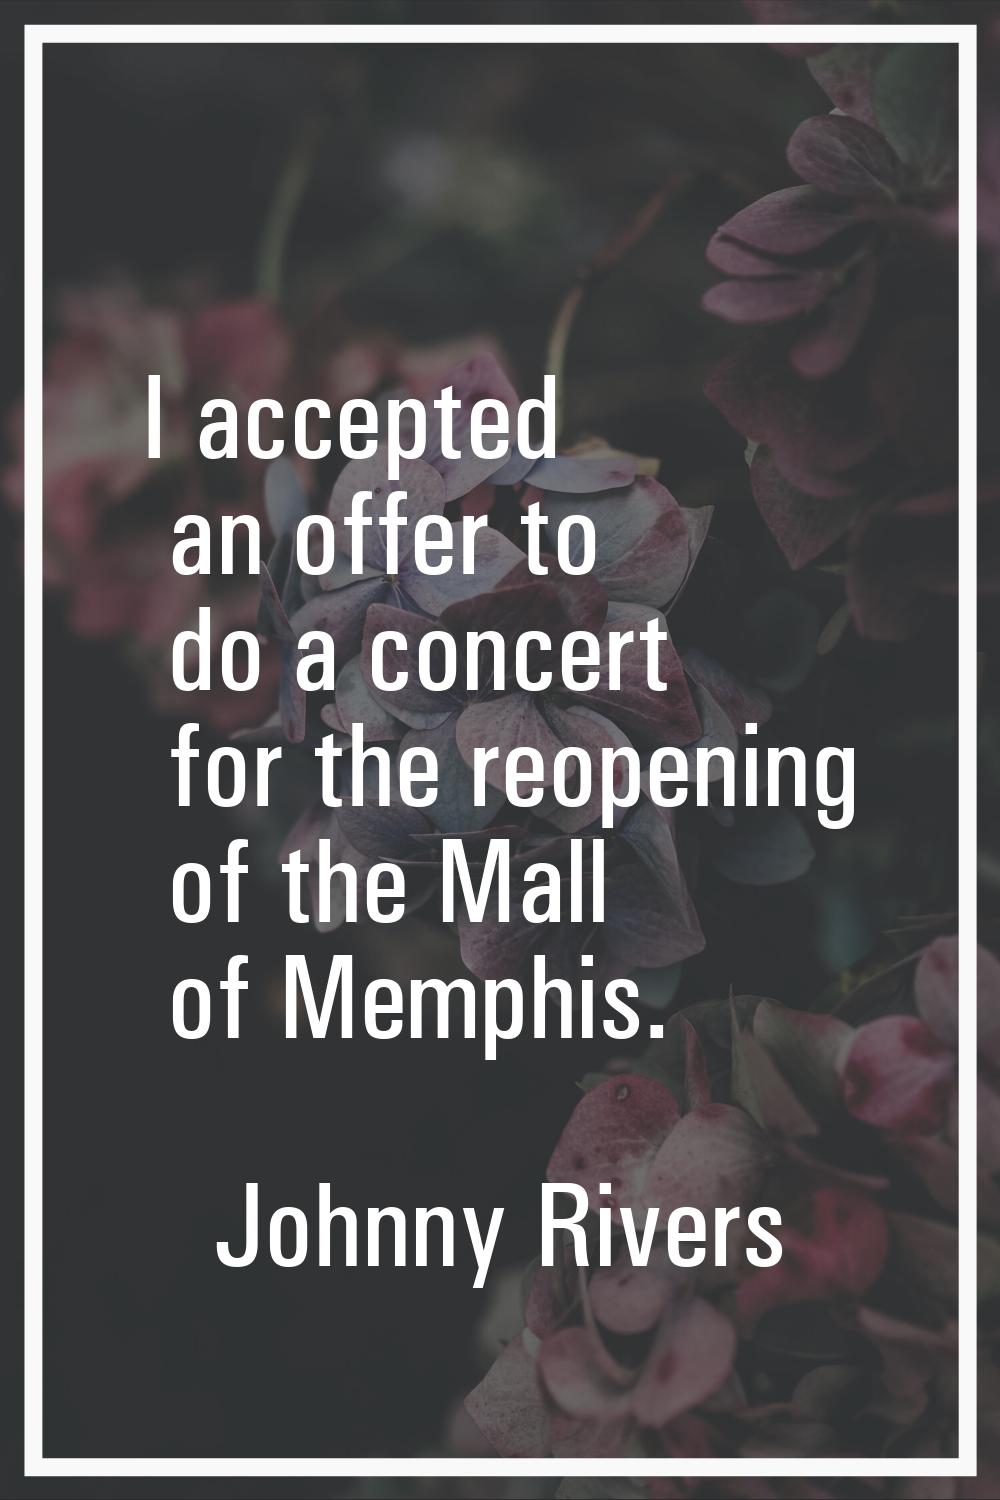 I accepted an offer to do a concert for the reopening of the Mall of Memphis.